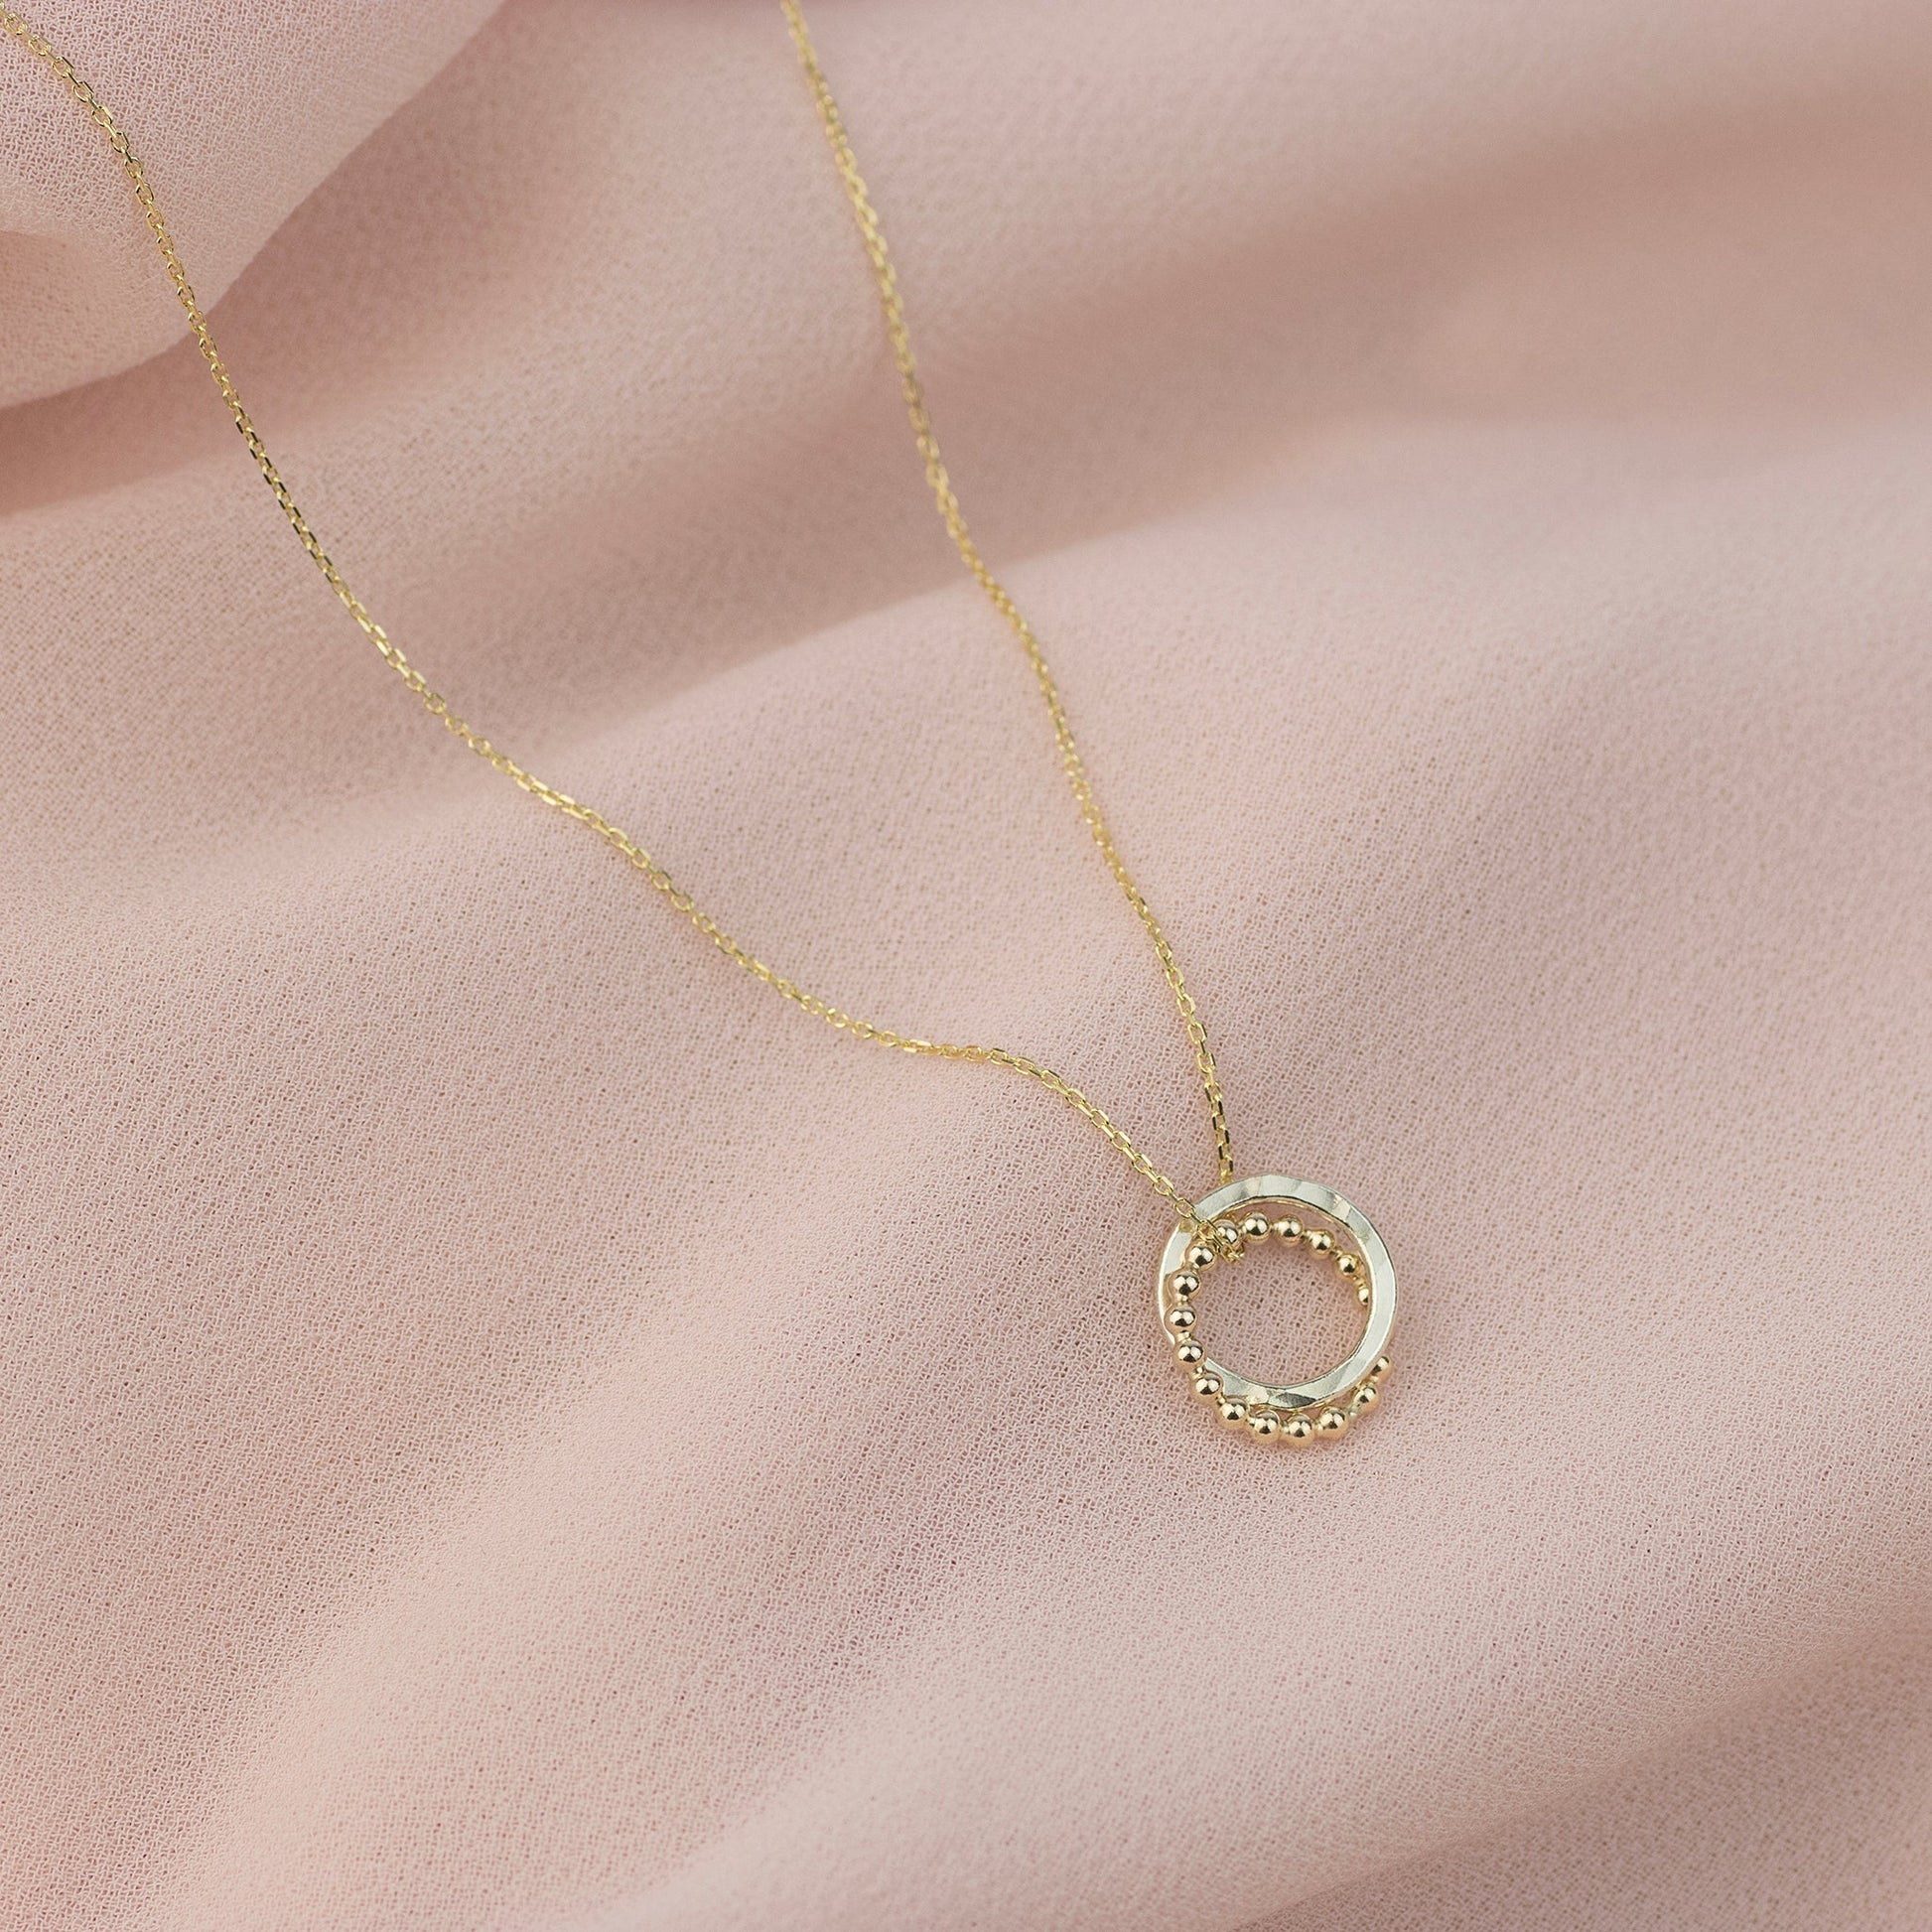 Gift for Bridesmaid from Bride - 9kt Gold & Silver Love Knot Necklace